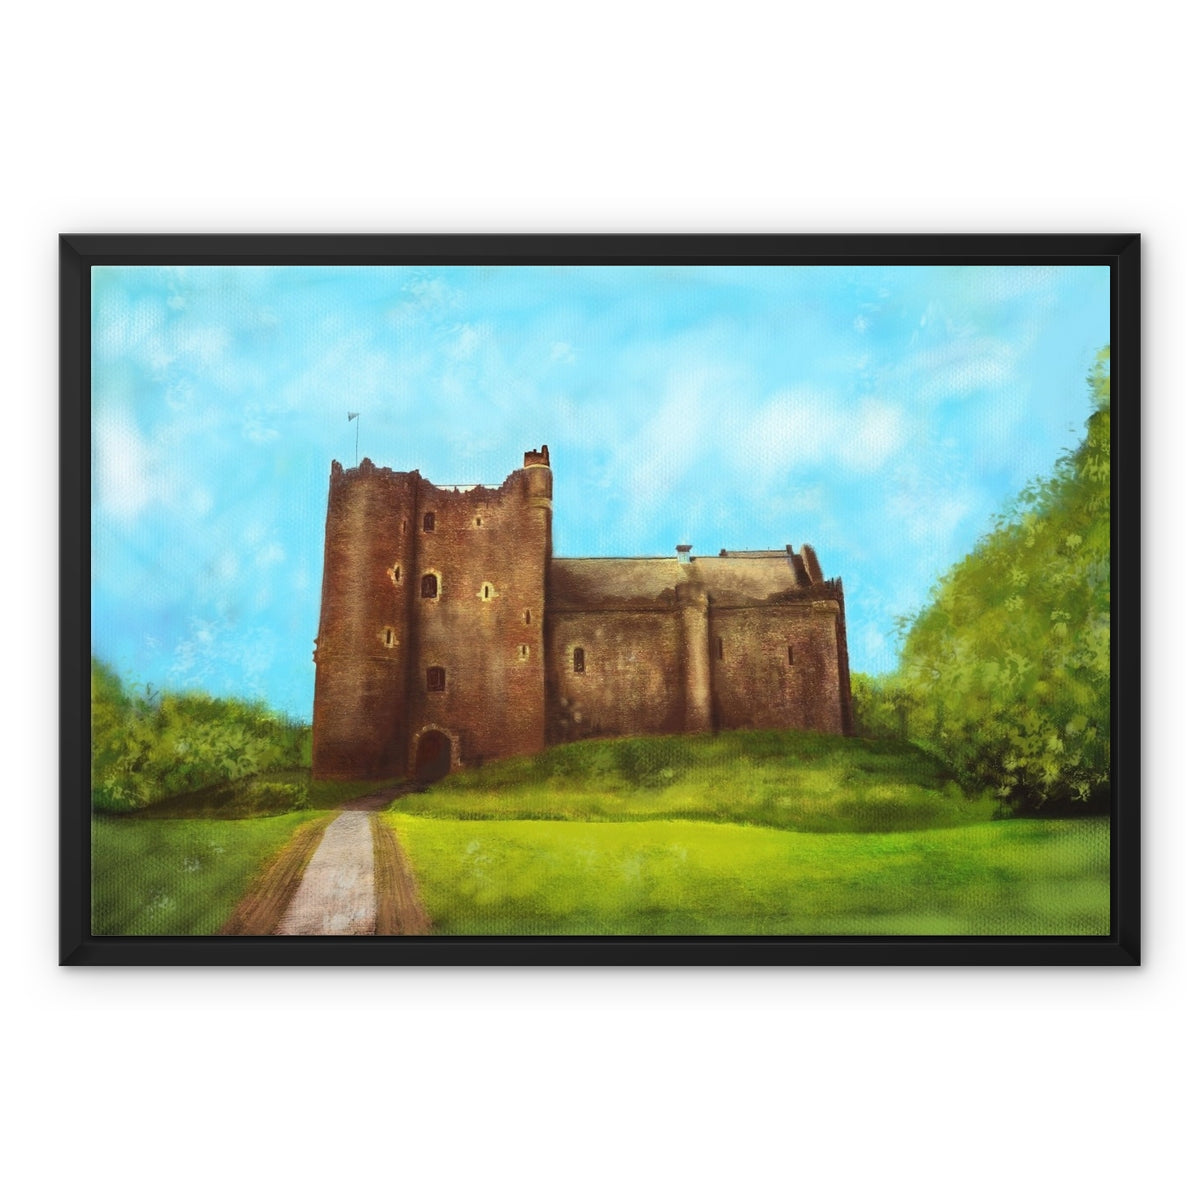 Doune Castle Painting | Framed Canvas From Scotland-Floating Framed Canvas Prints-Historic & Iconic Scotland Art Gallery-24"x18"-Paintings, Prints, Homeware, Art Gifts From Scotland By Scottish Artist Kevin Hunter